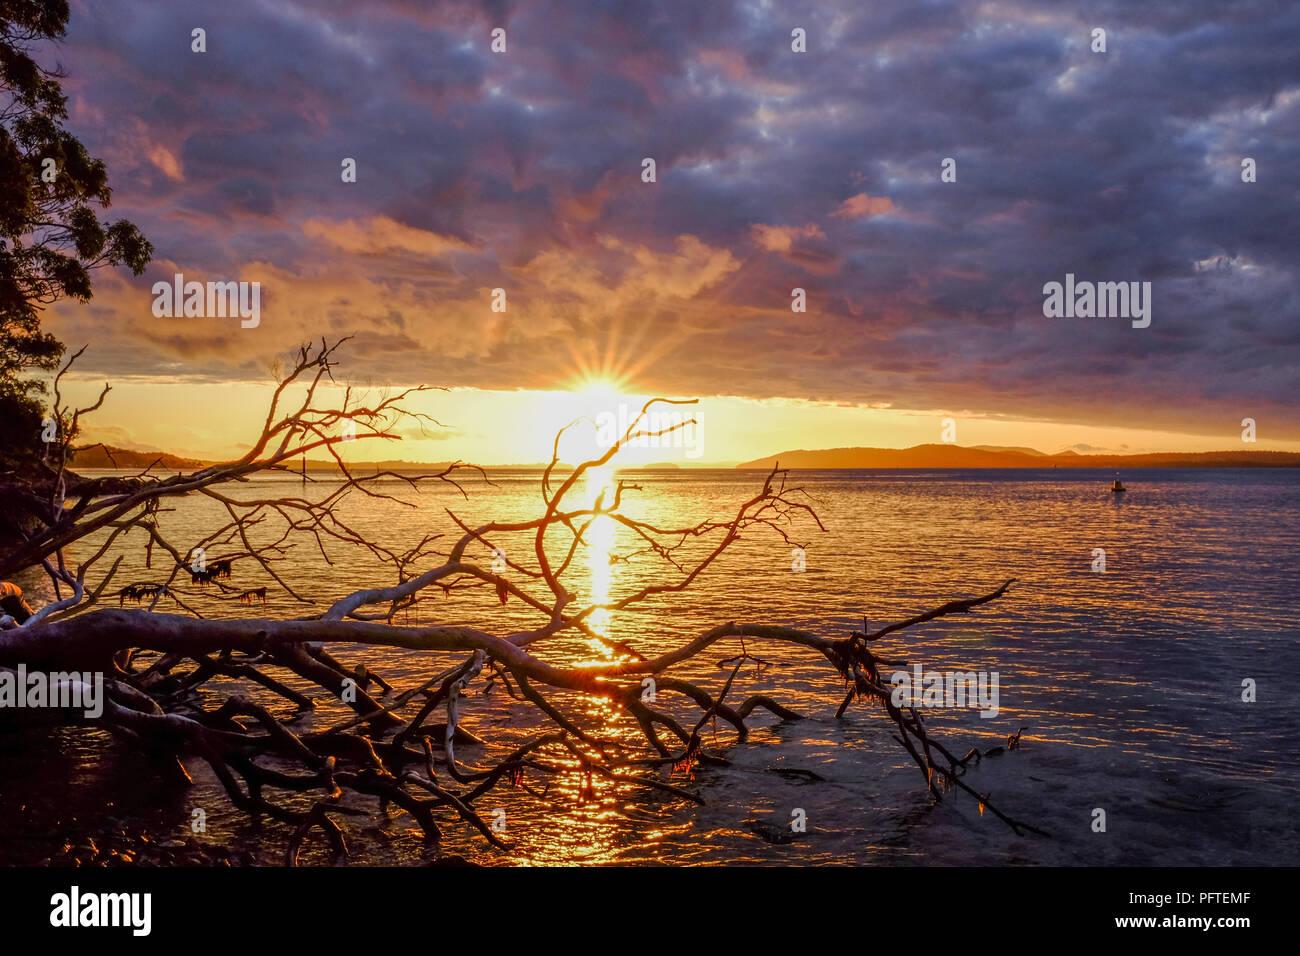 Sun setting through colourful sky over ocean with silhouette of fallen tree Stock Photo